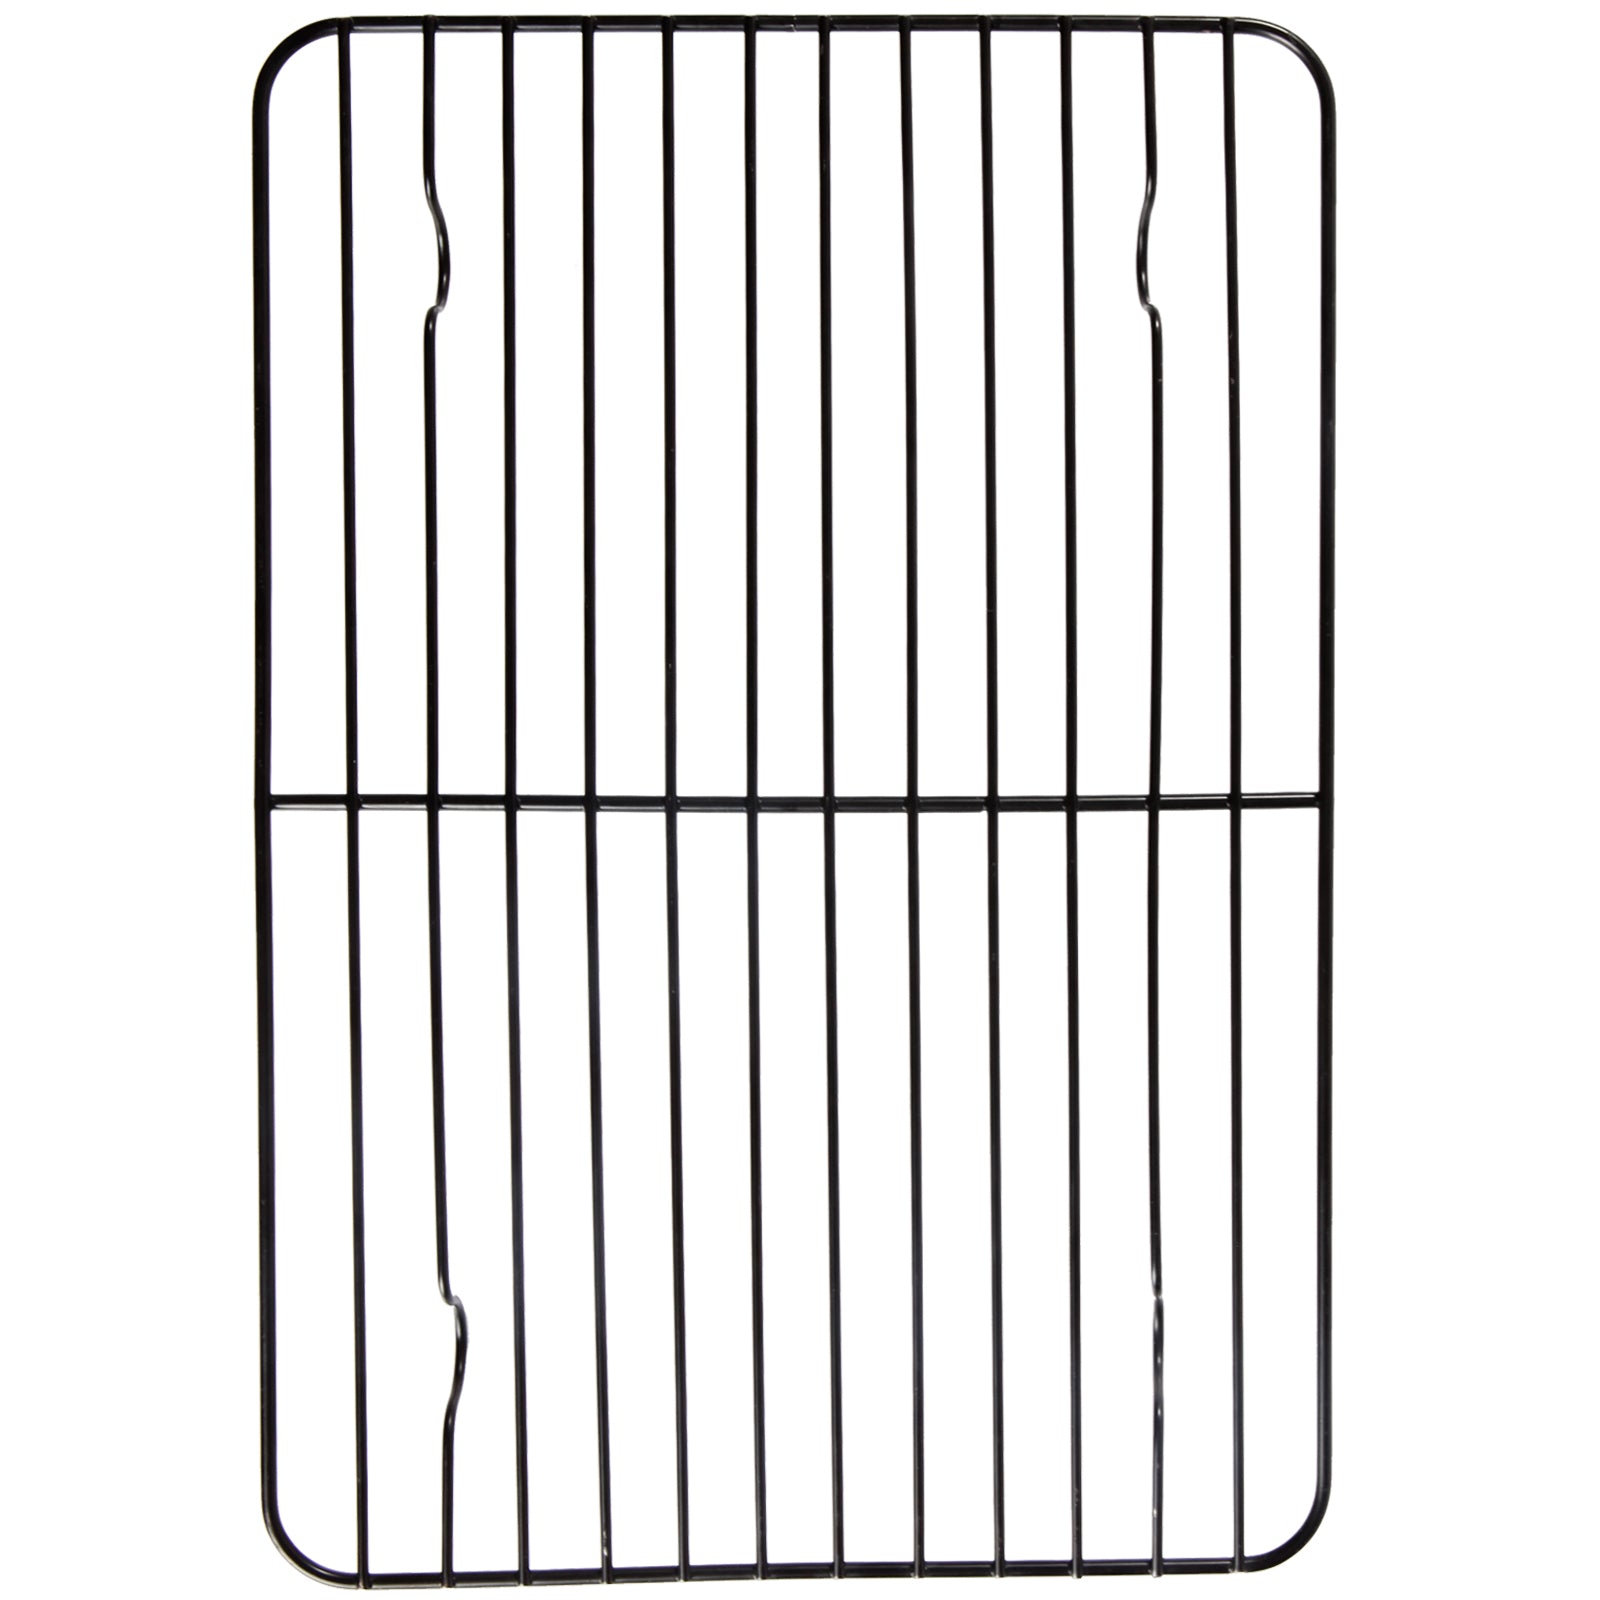 12.2" x 8.5" Baking and Cooling Rack